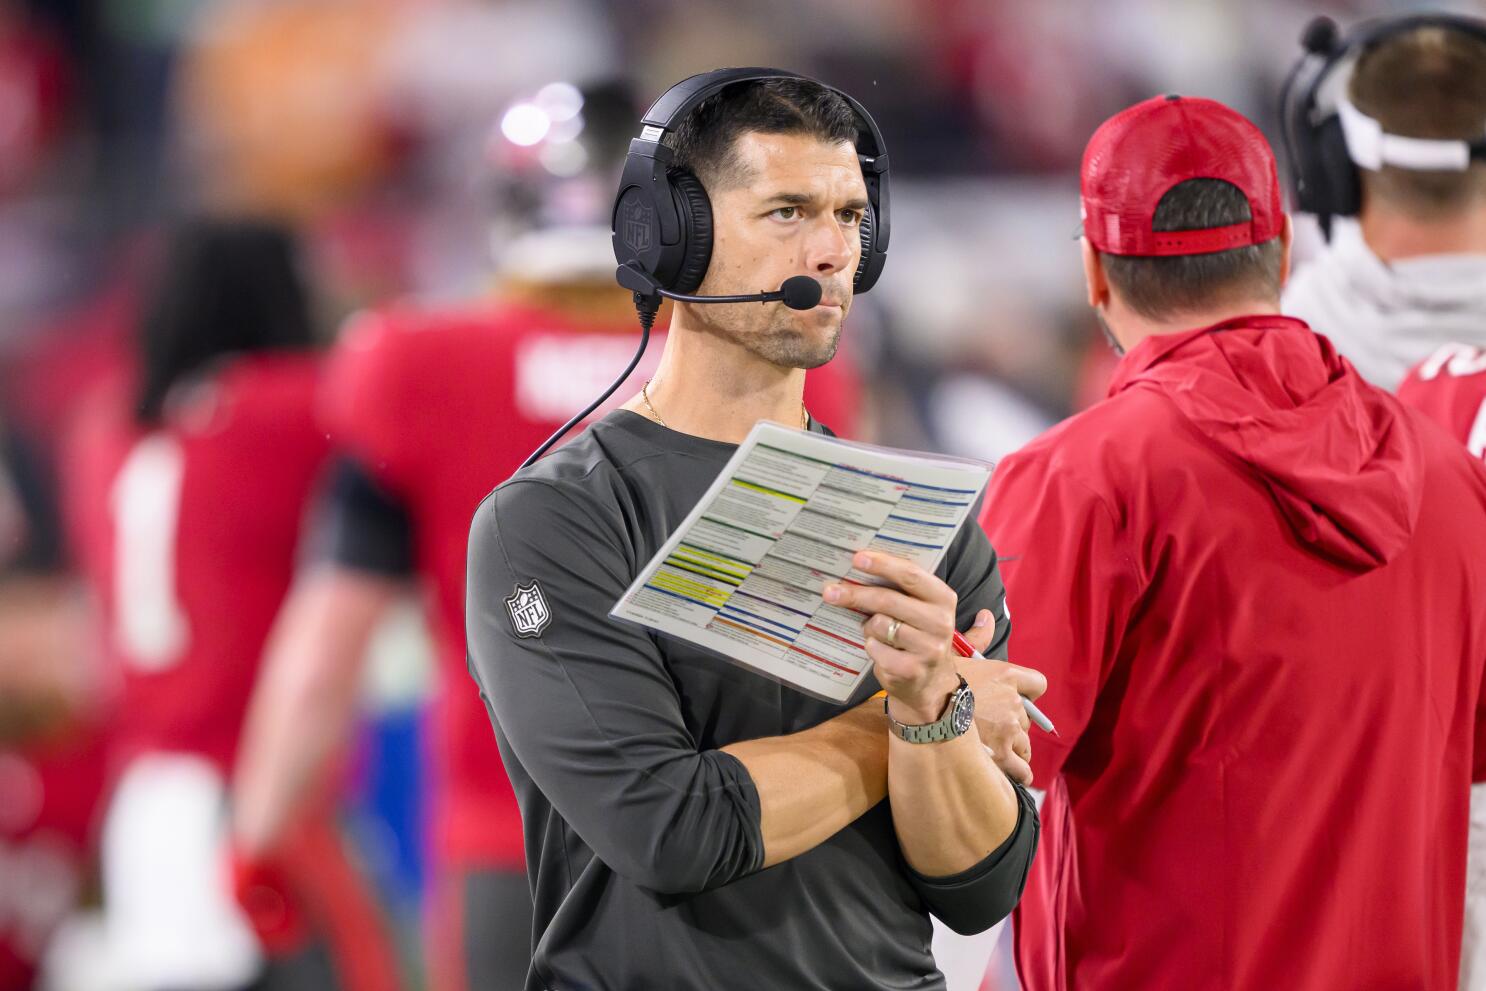 Panthers agree to terms with Bucs offensive coordinator Dave Canales to  become their next head coach - The San Diego Union-Tribune